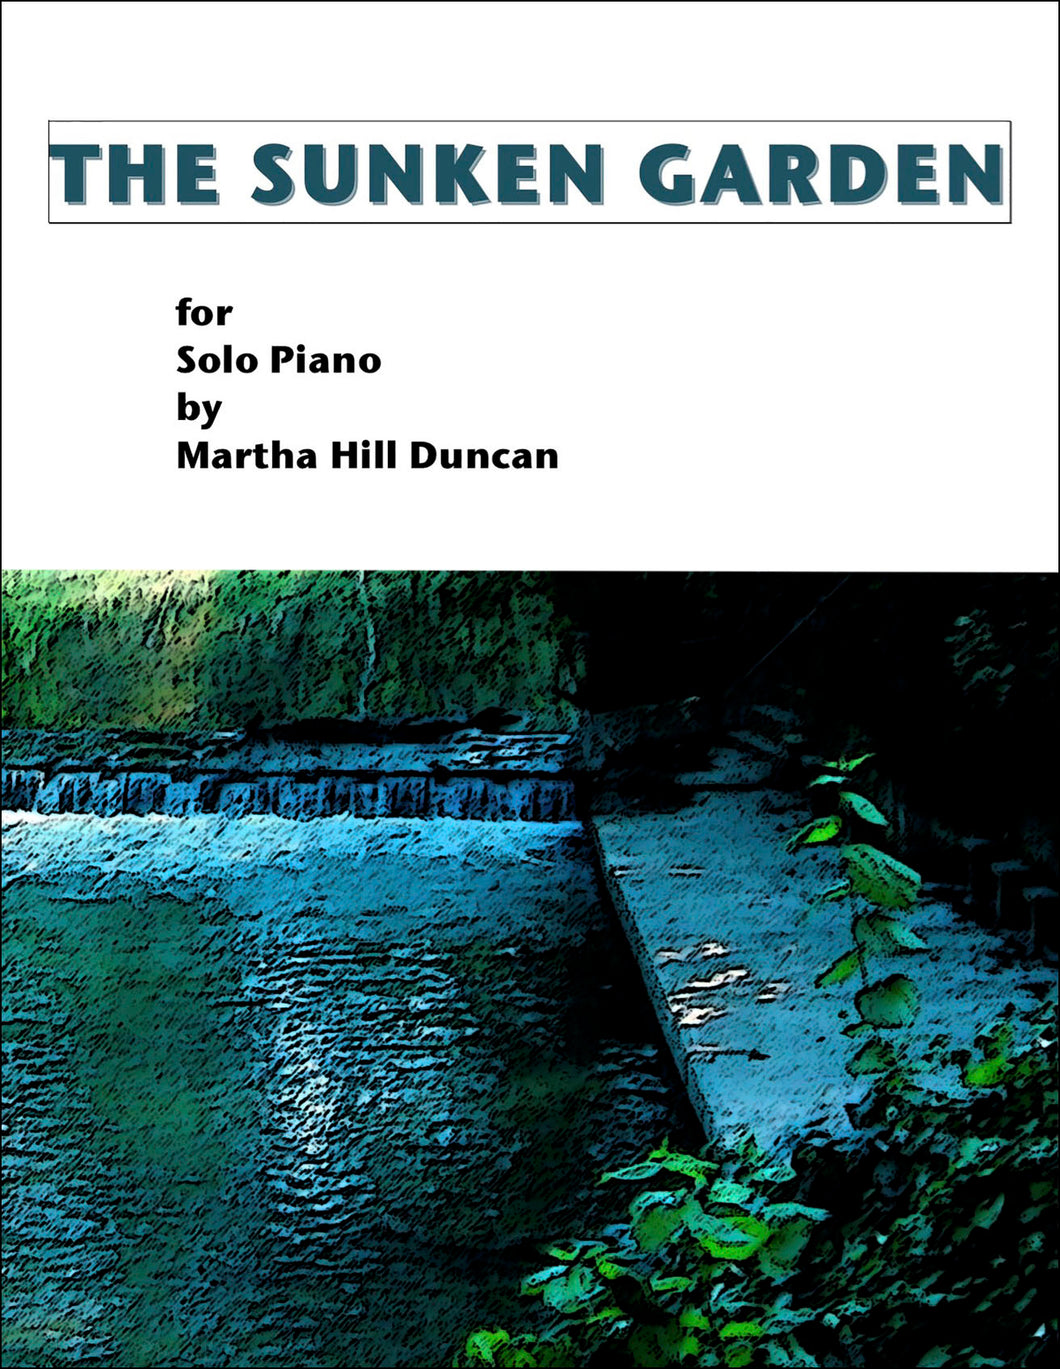 THE THEATER - Piano Solo from THE SUNKEN GARDEN